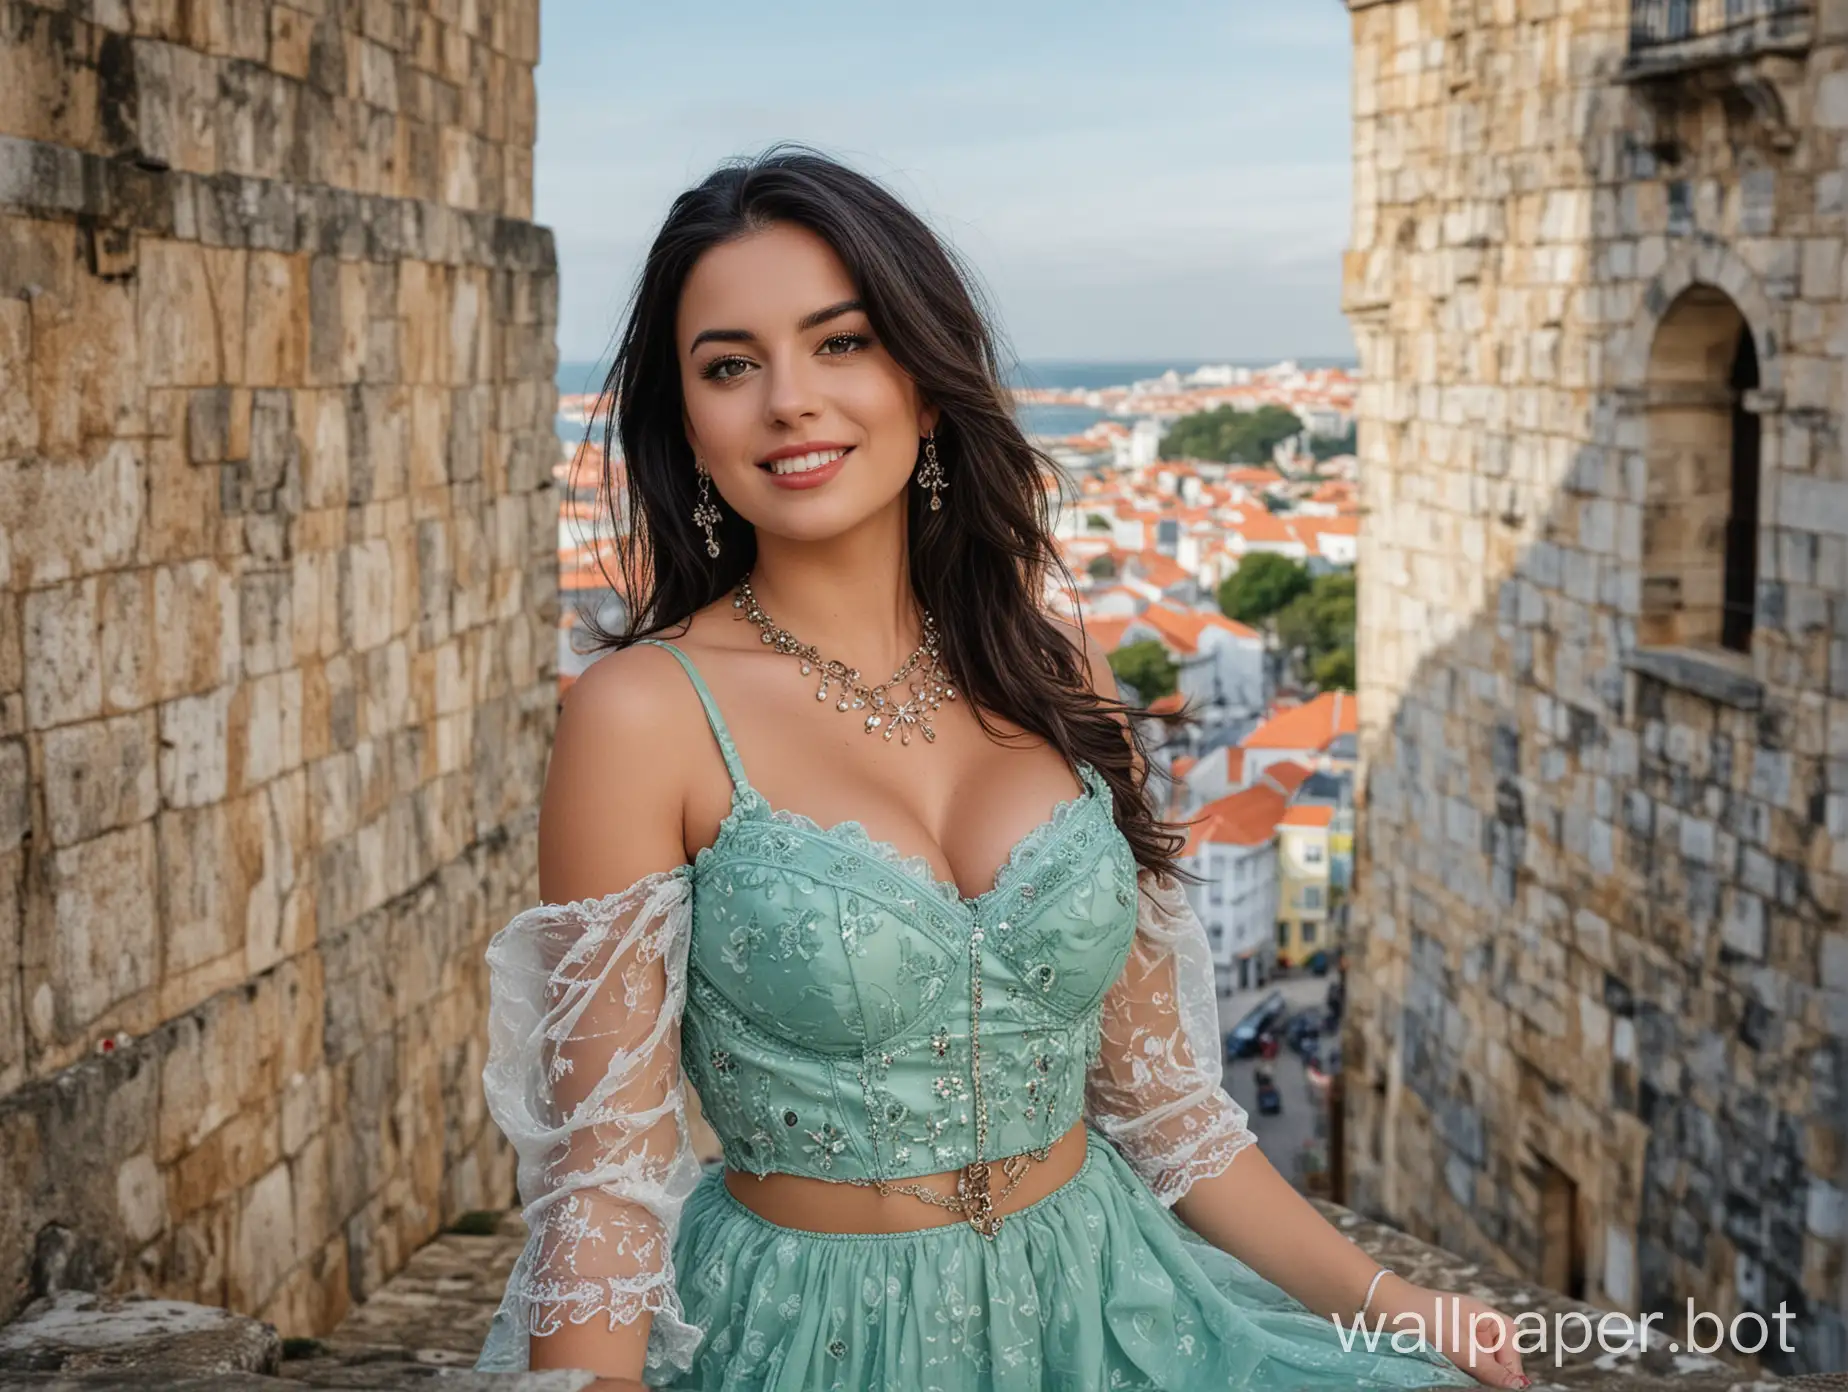 camera shot head to feet full shot. Generate an image of most beautiful Portugal actress 30 year old cute pretty big chest busty, big tits, wearing Cyan color mesh lingerie dress, with a fair white skin tone and long hair black. She has a round face smile. The background is 1. Lisbon: The capital city boasts a captivating blend of historic architecture, vibrant culture, and scenic viewpoints like São Jorge Castle and Belém Tower. She is wearing makeup and has a necklace, ear ring and bracelet on.